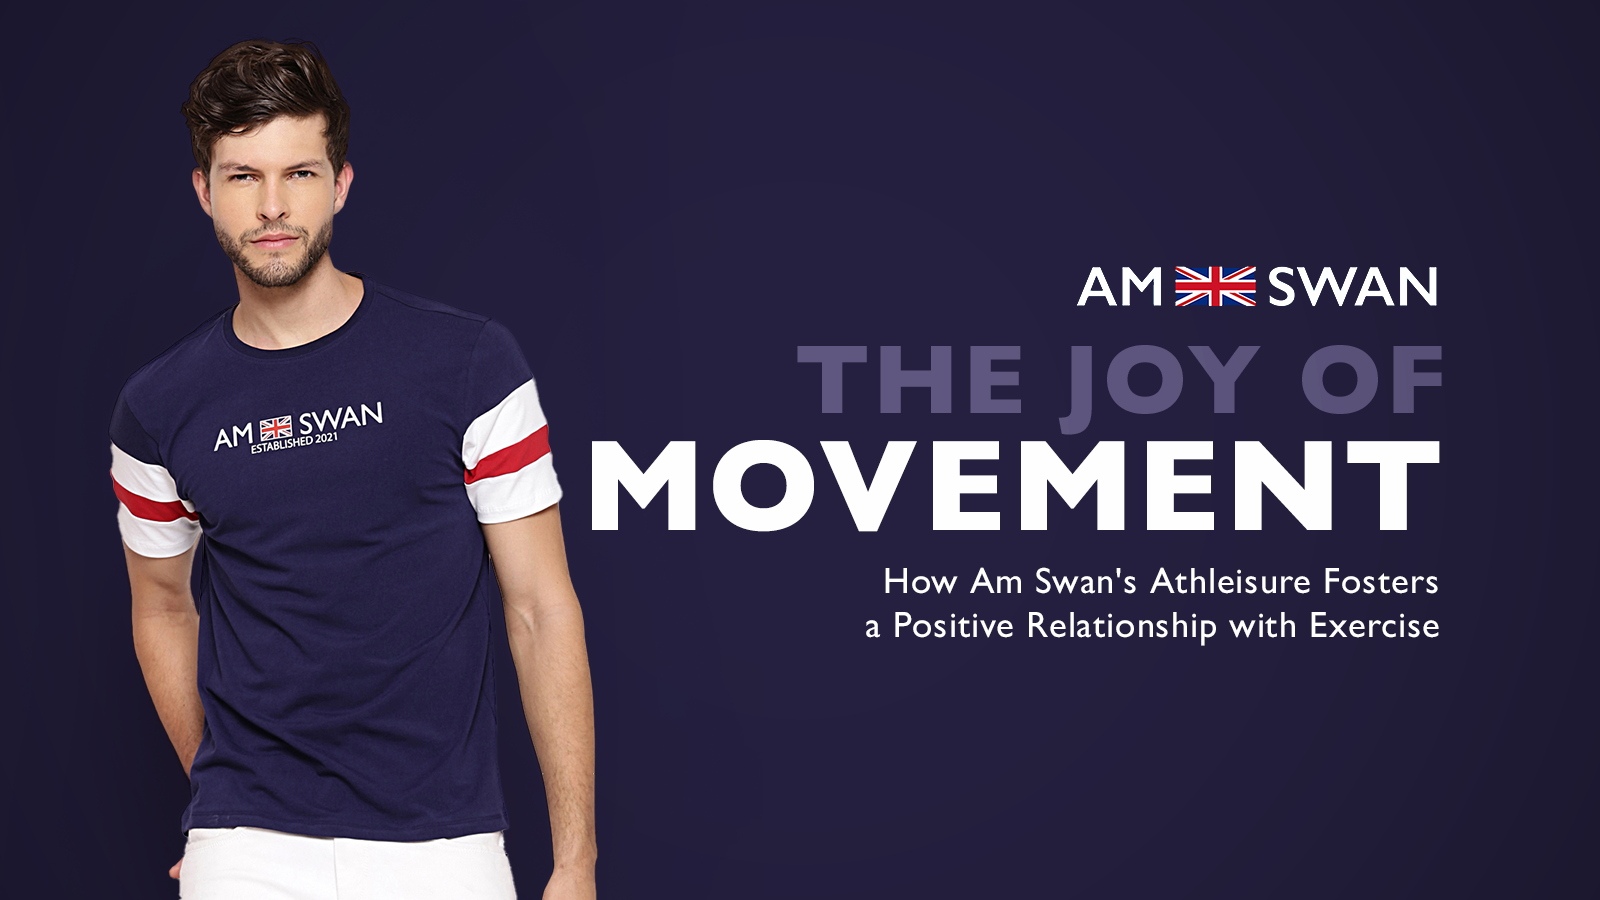 The Joy of Movement: How Am Swan's Athleisure Fosters a Positive Relationship with Exercise